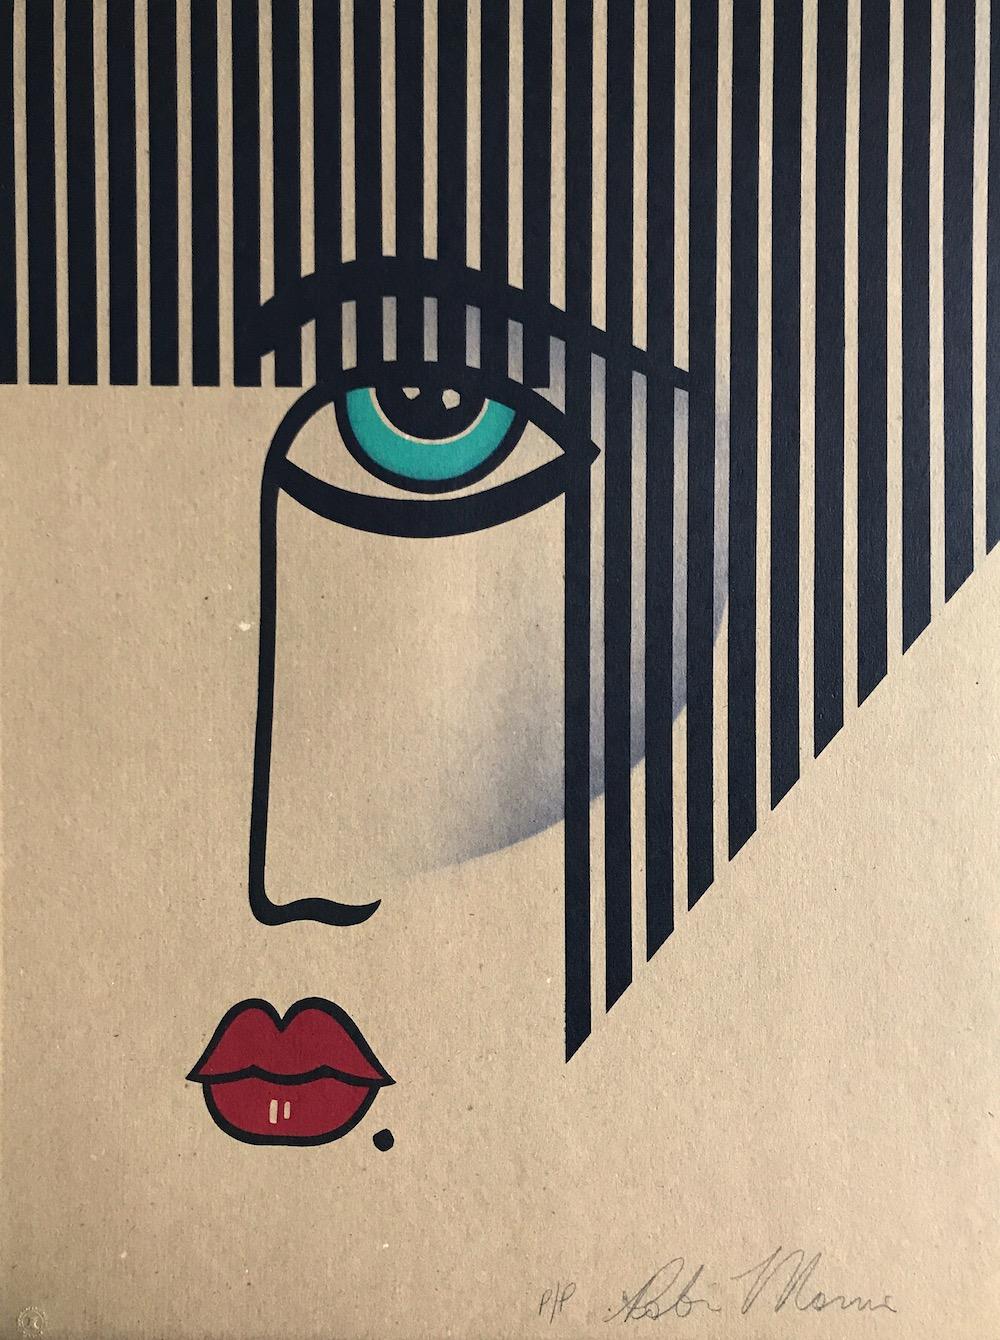 NEW DECO Signed Lithograph, Modern Face Portrait on Brown Paper, Black Stripes